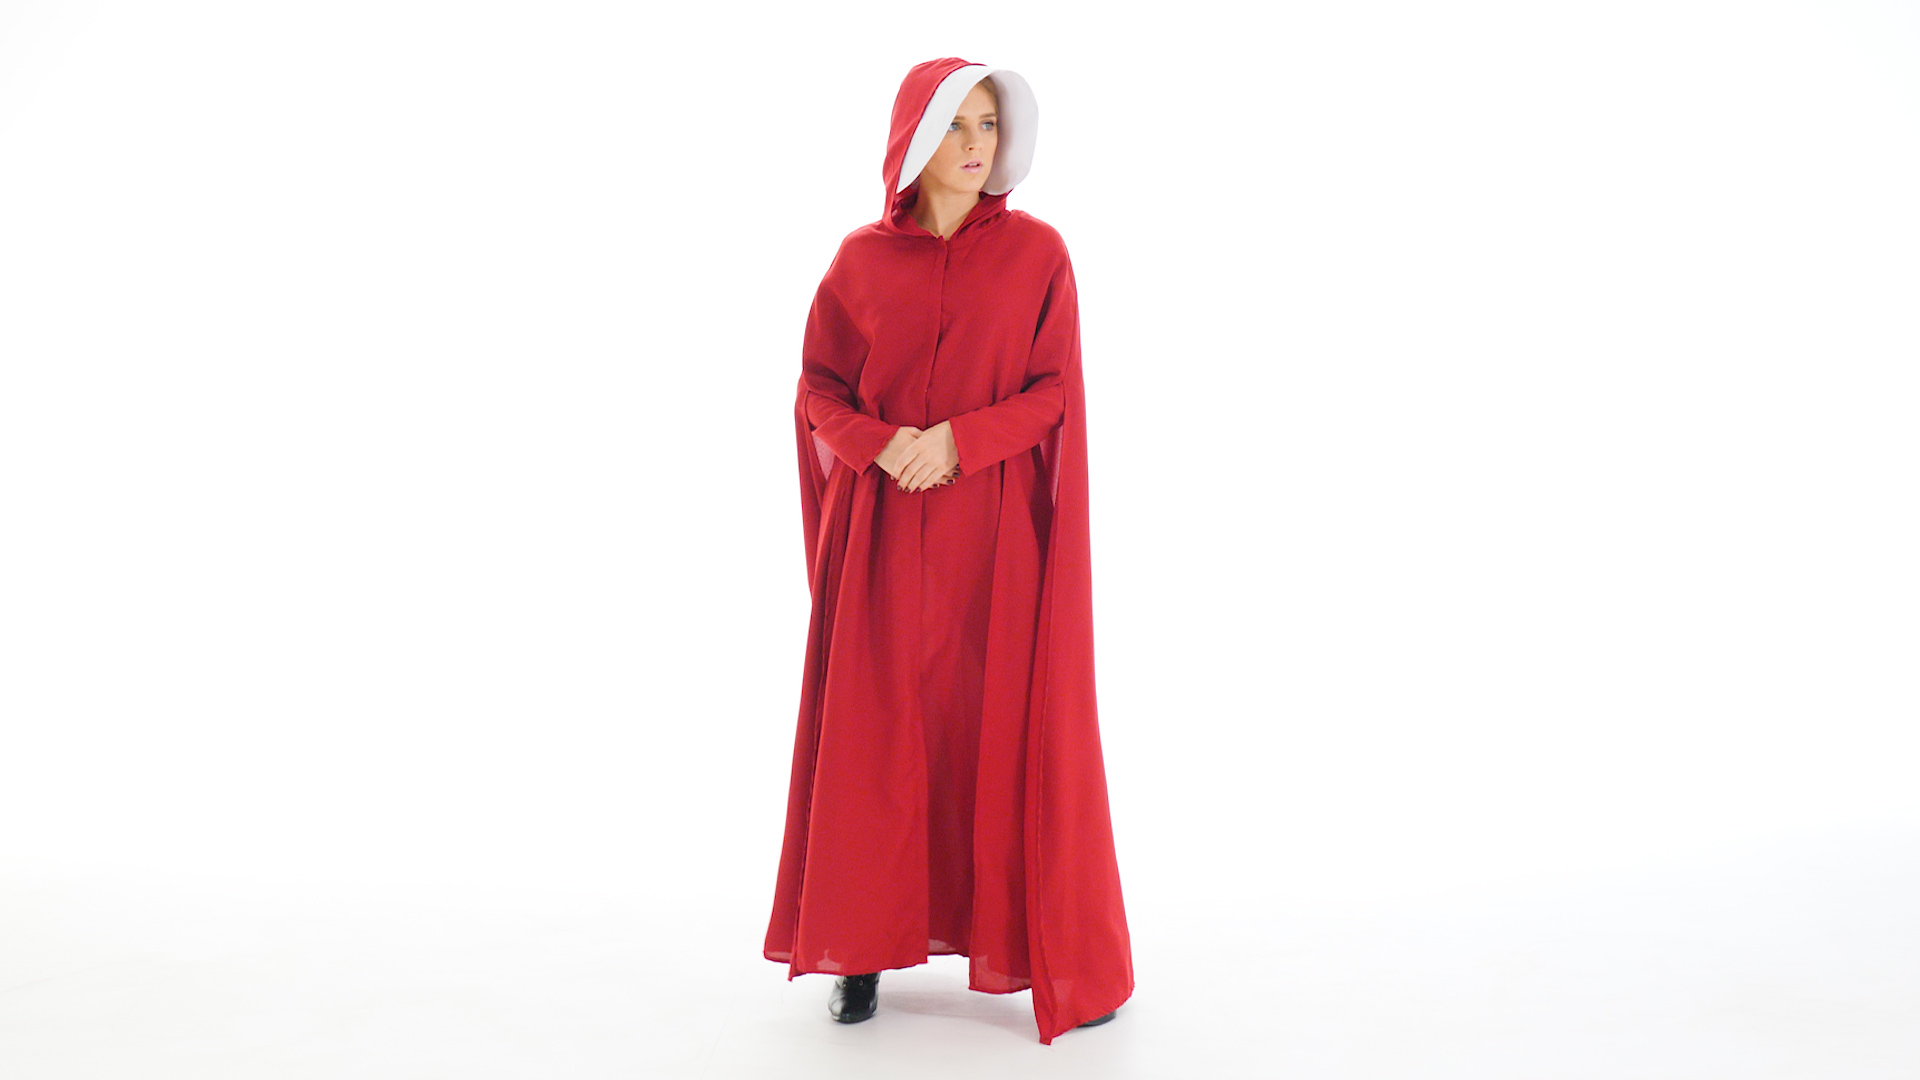 Start a revolution of your own in this Handmaid's Tale Women's Costume! It features the iconic red cloaked dress from the Handmaid's Tale Hulu series.